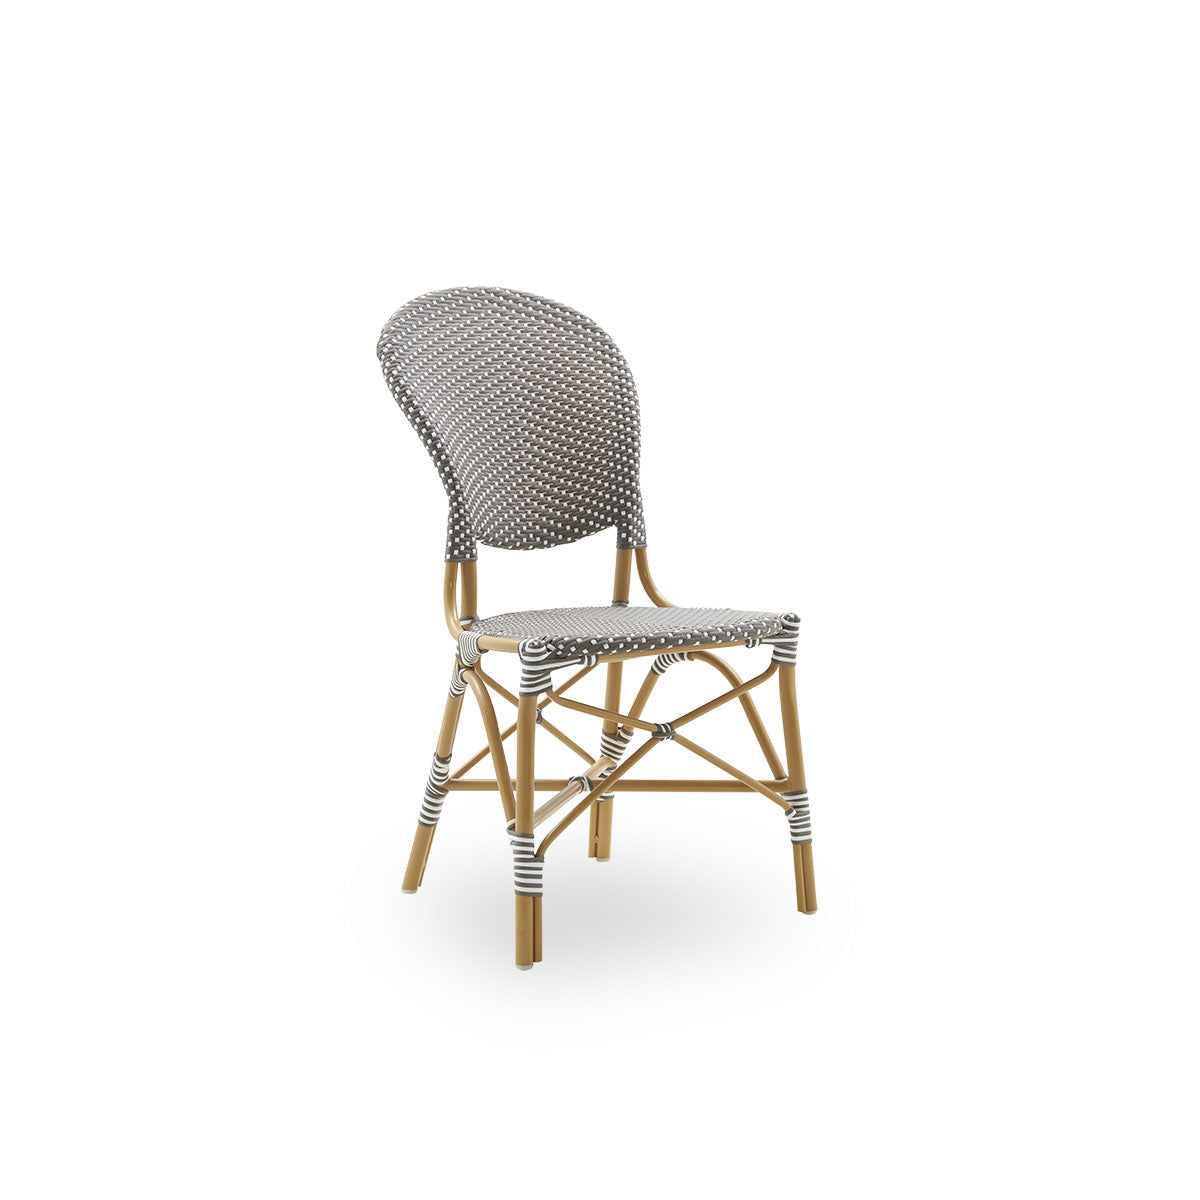 Isabell Exterior Dining Chair Cappuccino with White dots